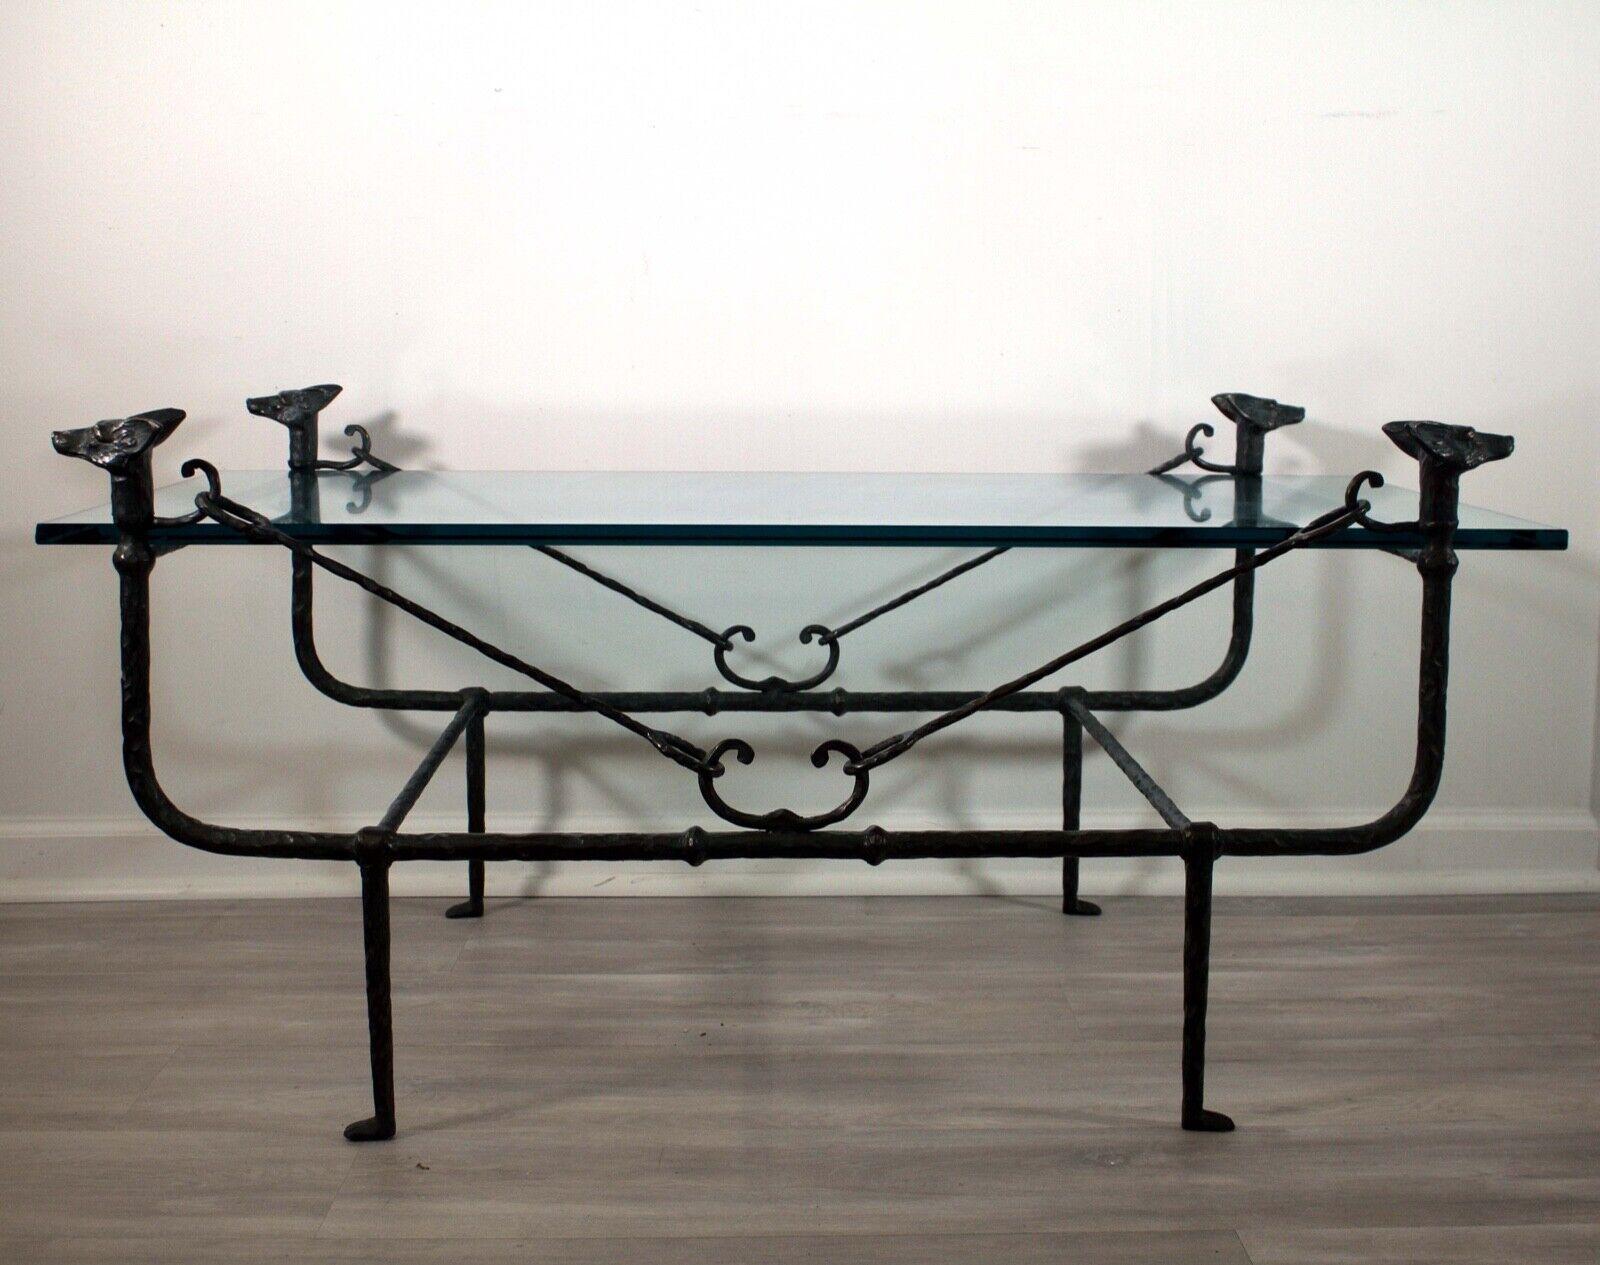 This classic Giacometti style wrought iron coffee table by Paul Ferrante is a timeless piece that will bring a touch of sophistication to any interior. The table is composed of an intricate and delicate wrought iron frame, with a blackened finish